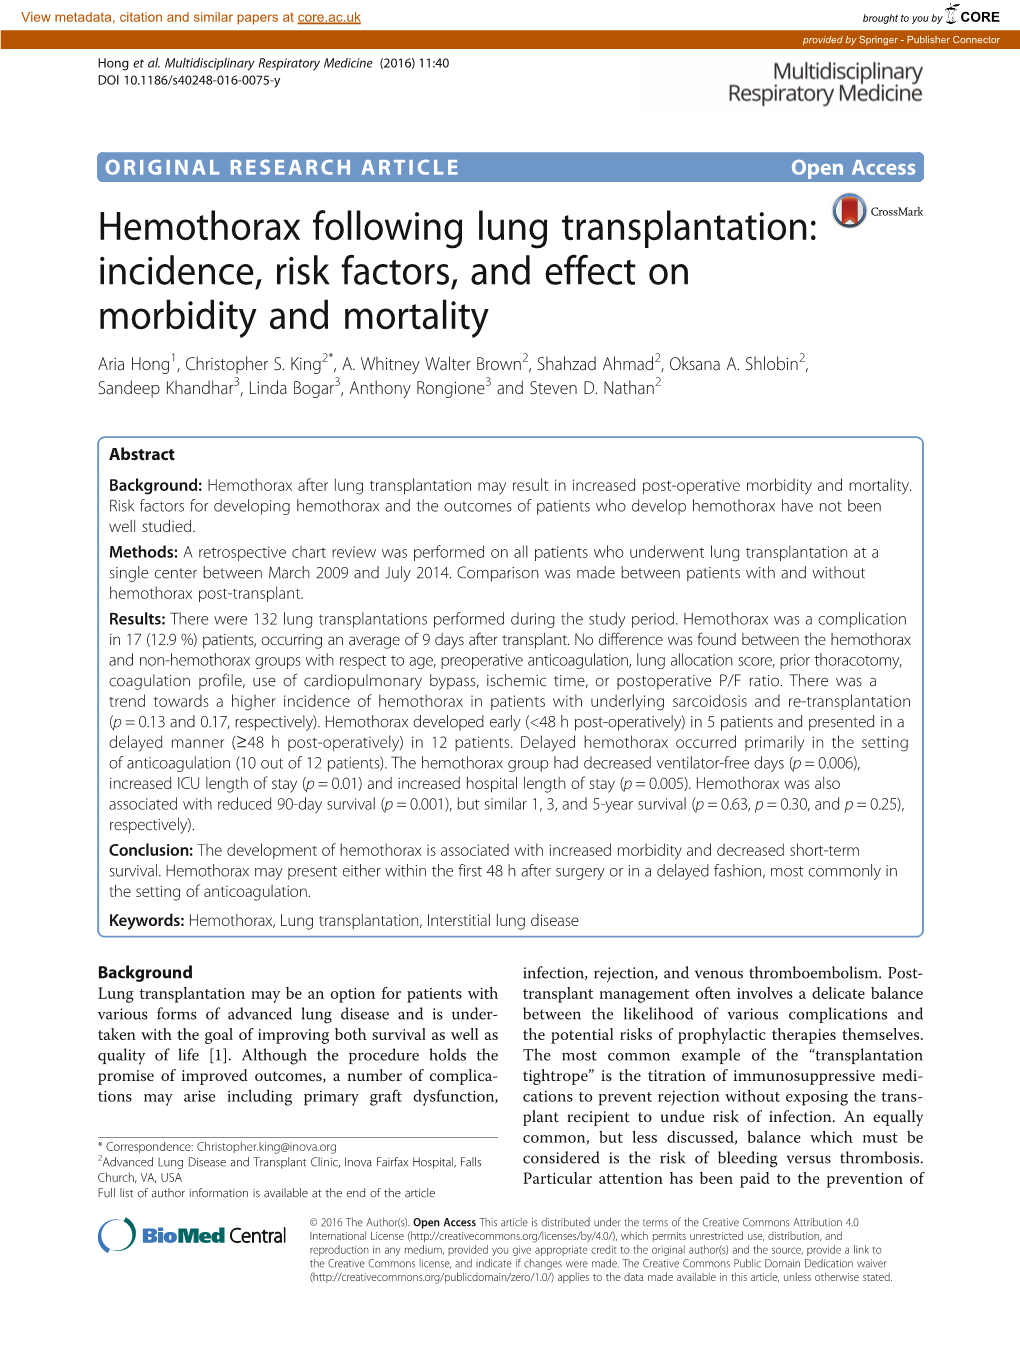 Hemothorax Following Lung Transplantation: Incidence, Risk Factors, and Effect on Morbidity and Mortality Aria Hong1, Christopher S